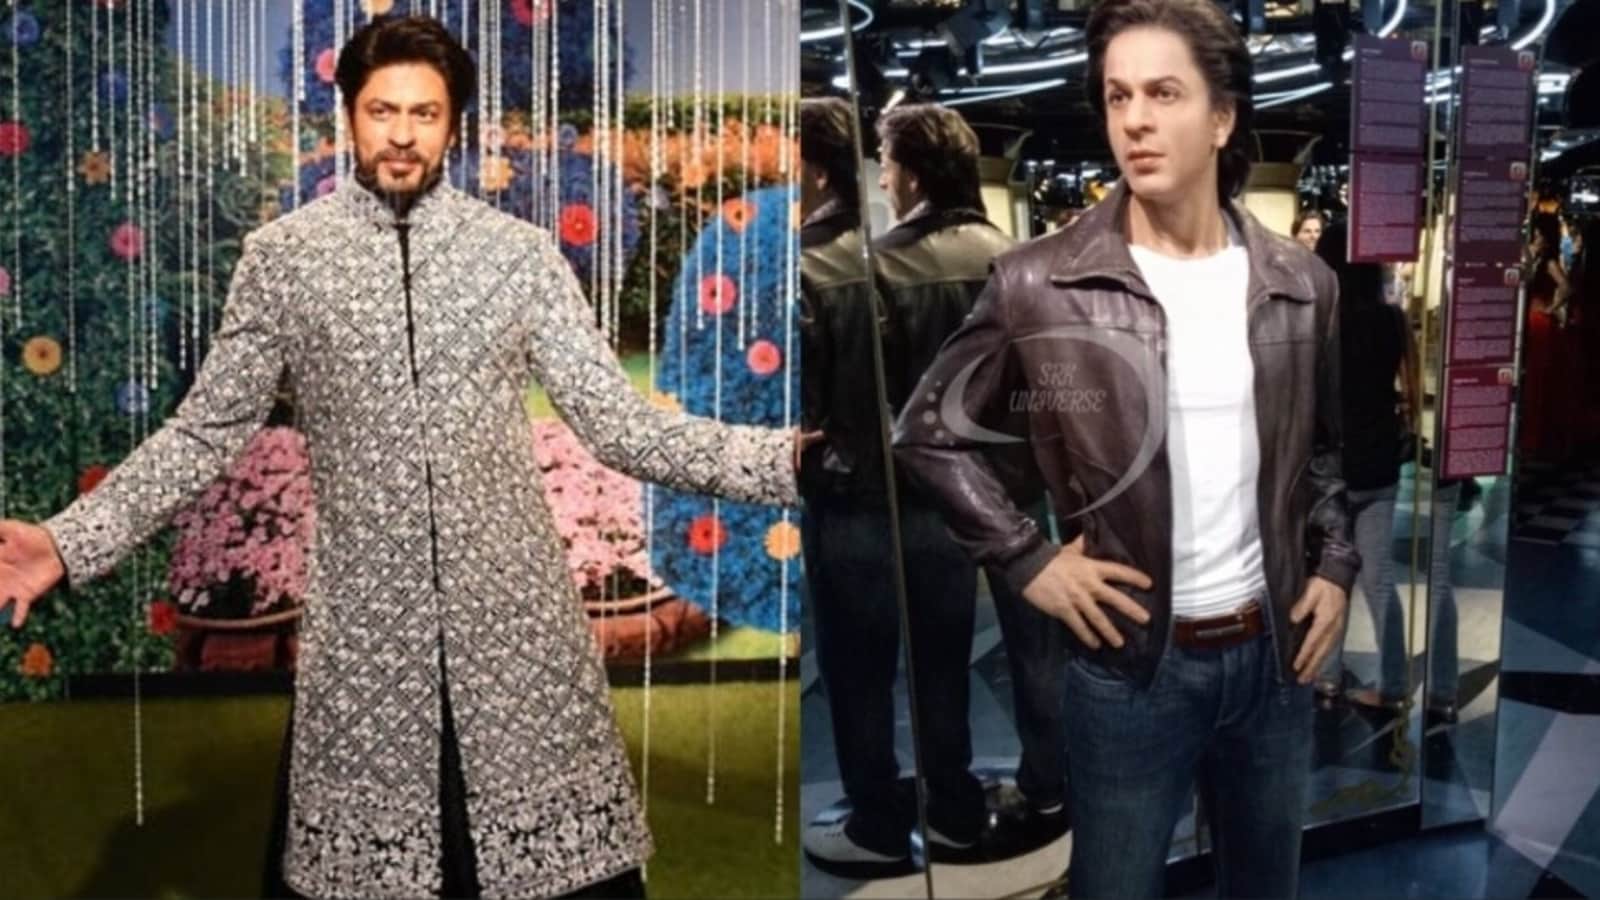 Shah Rukh Khan has his wax statues in London, New York, Hong Kong, other cities: Check out the best and worst of them